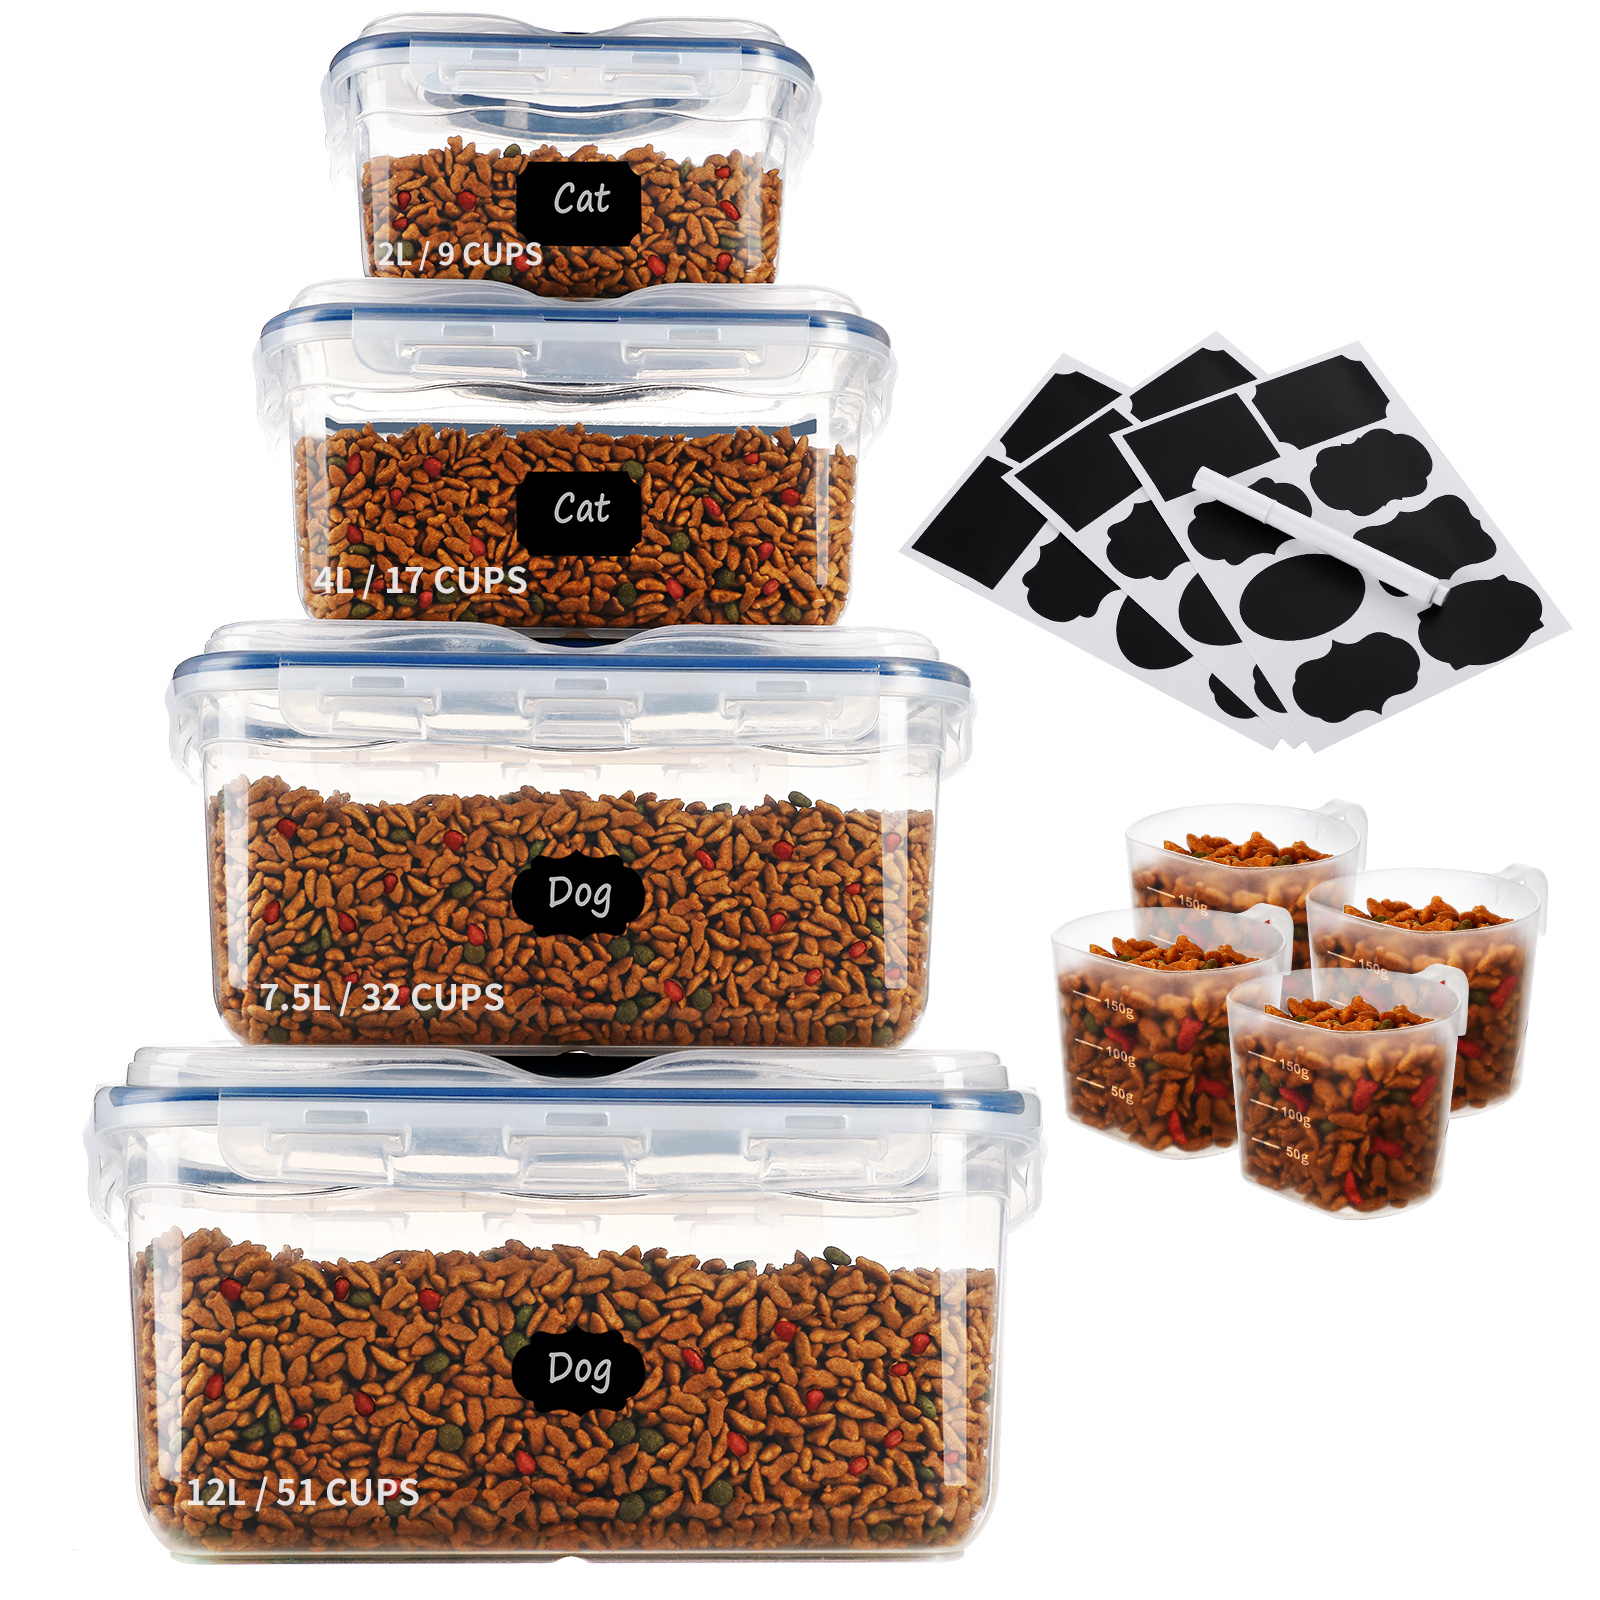 4 Pieces Set of Pet Food Storage Containers